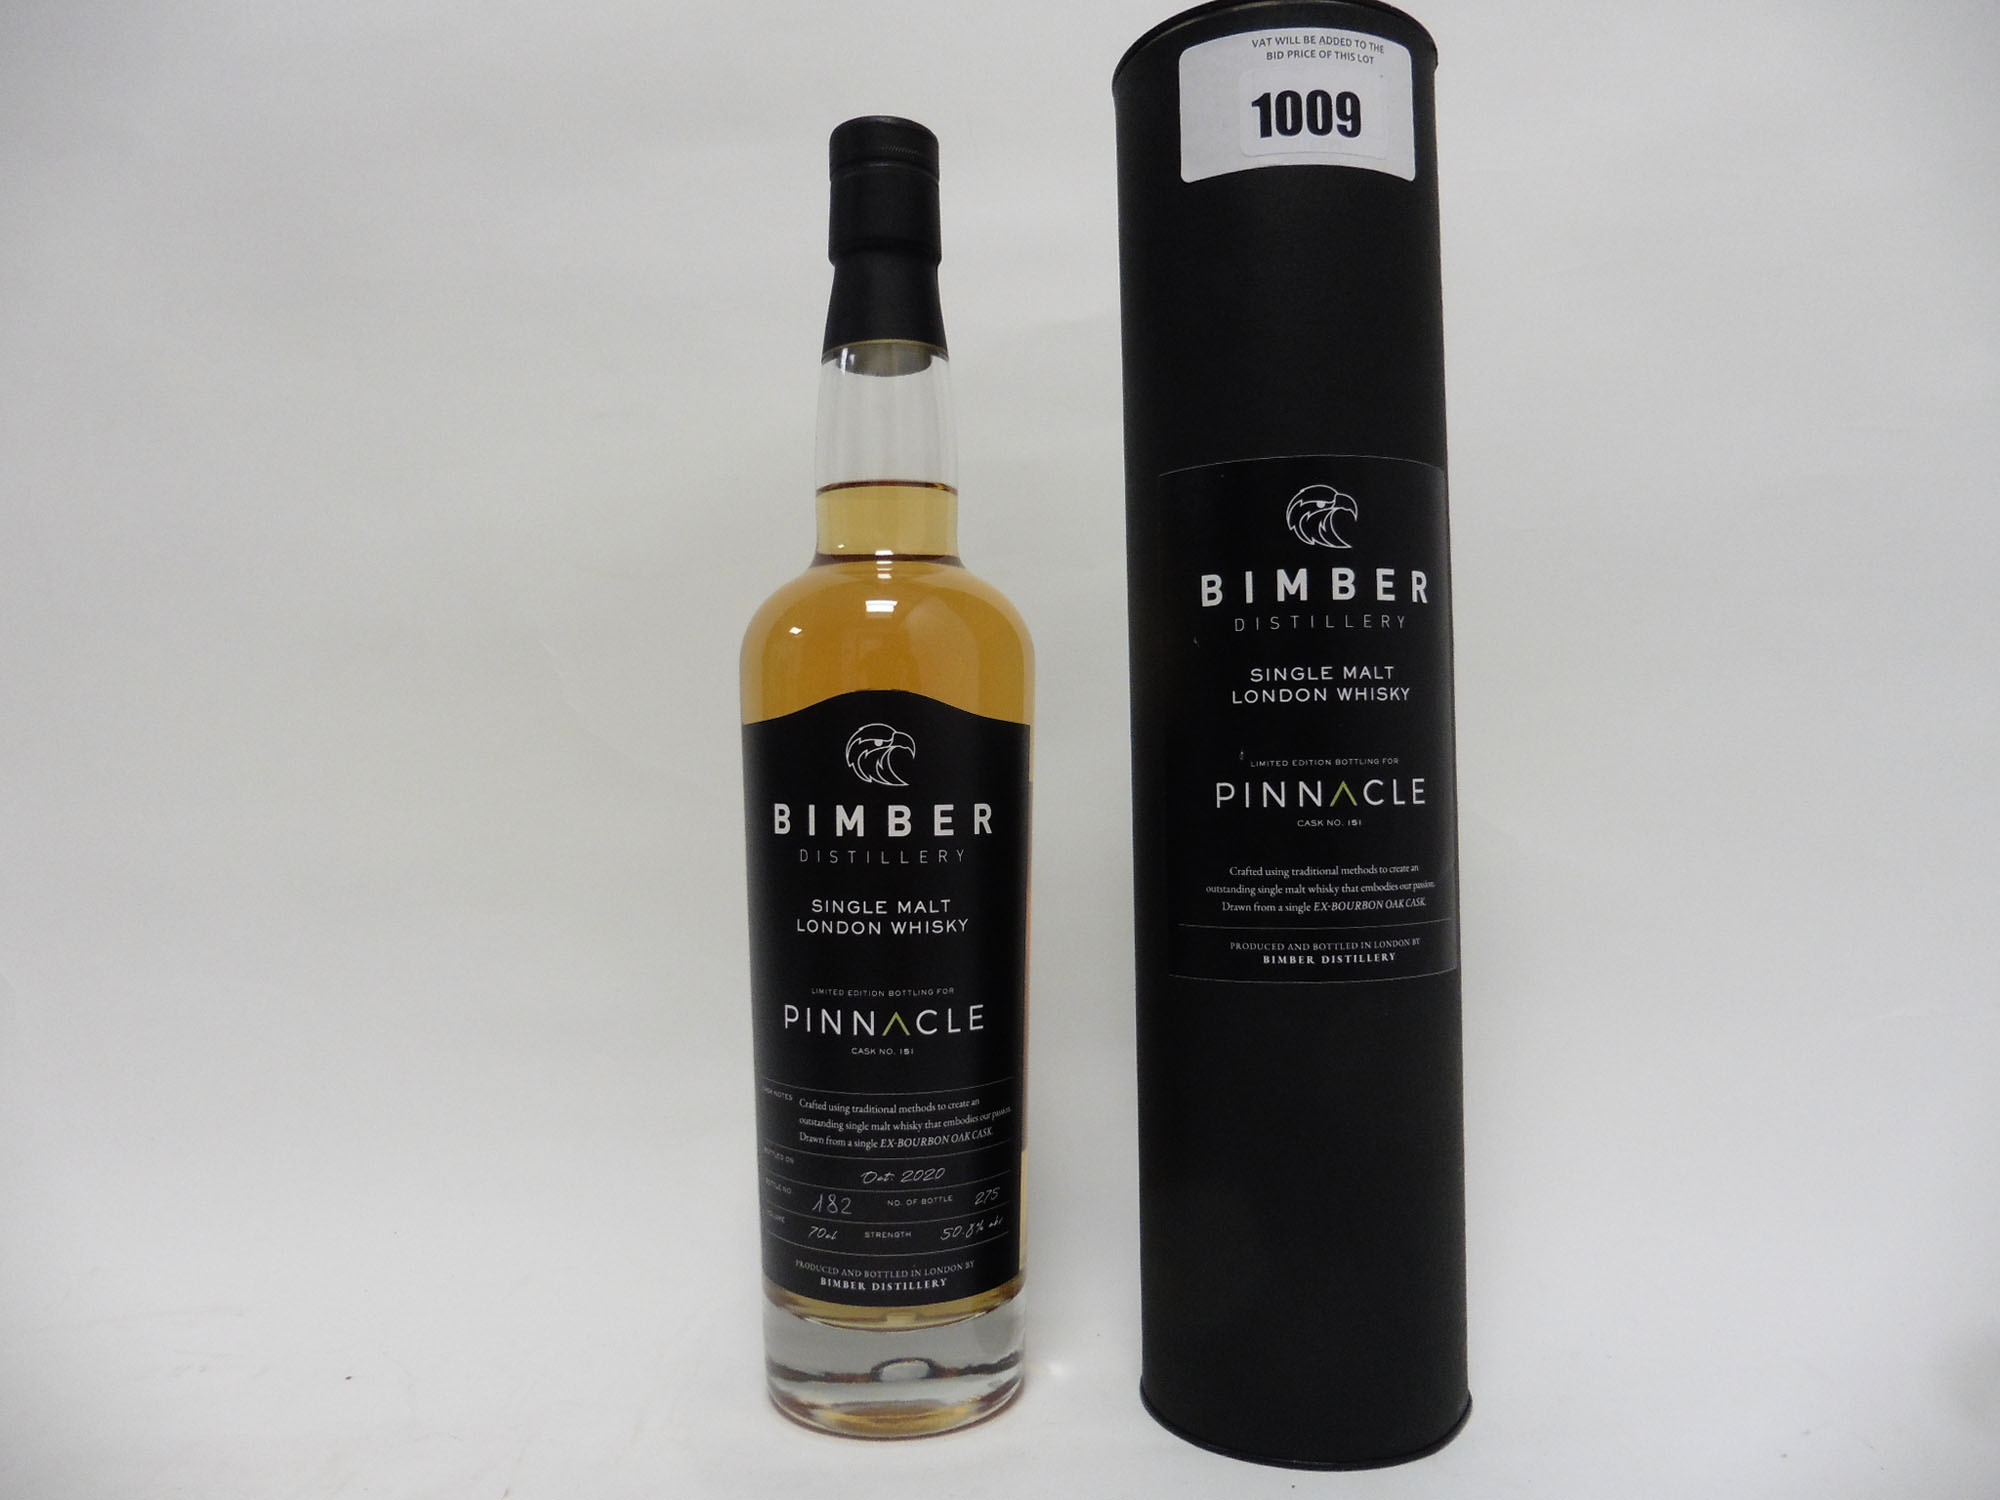 A bottle of Bimber Distillery Single Malt London Whisky Limited Edition bottling for Pinnacle with